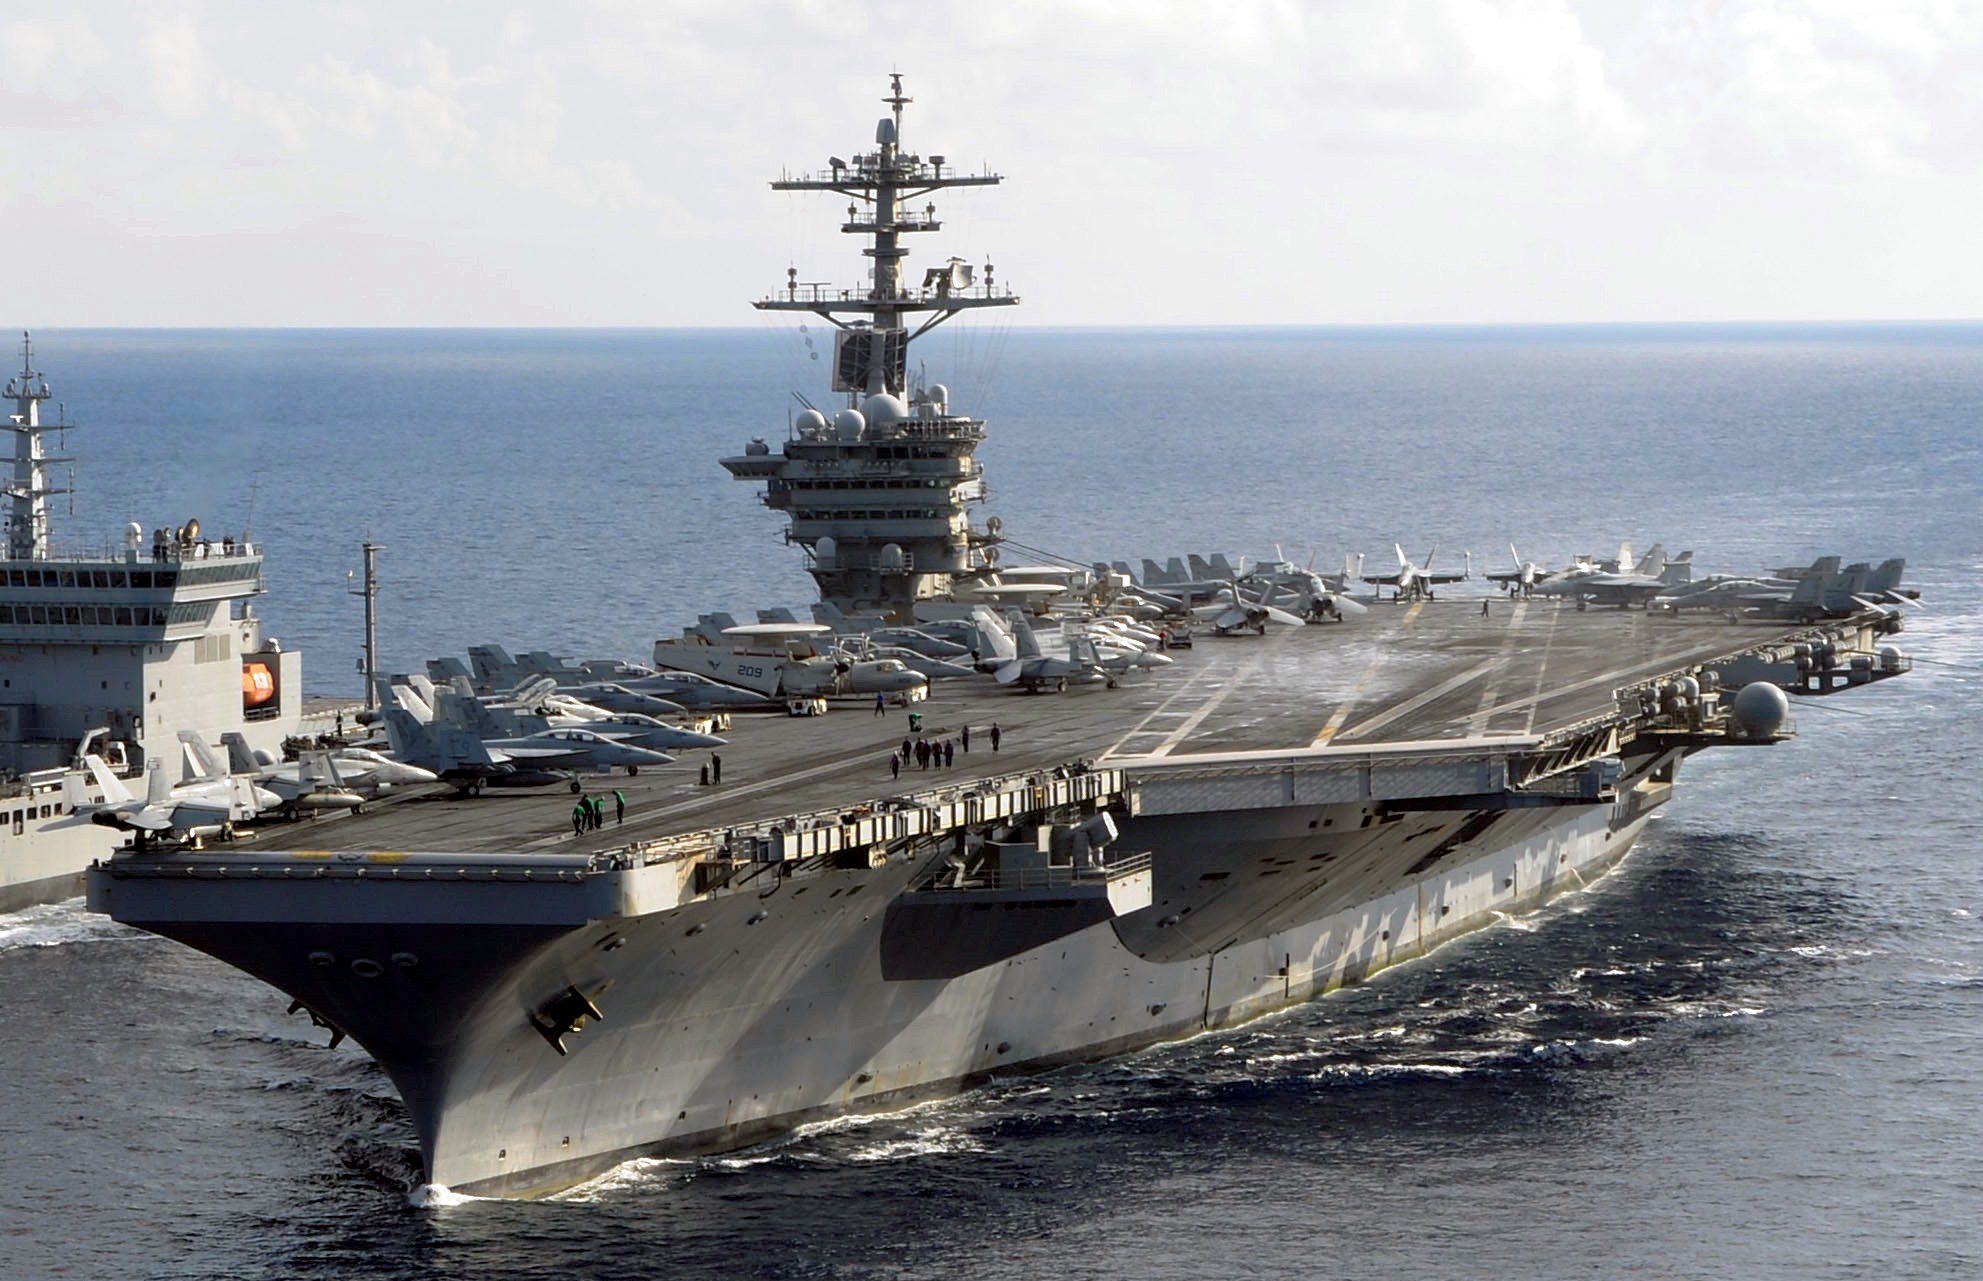 Chinese Bombers Simulated Attack on US Aircraft Carrier in South China Sea Three Days After Biden Inauguration | The Gateway Pundit | by Jim Hoft